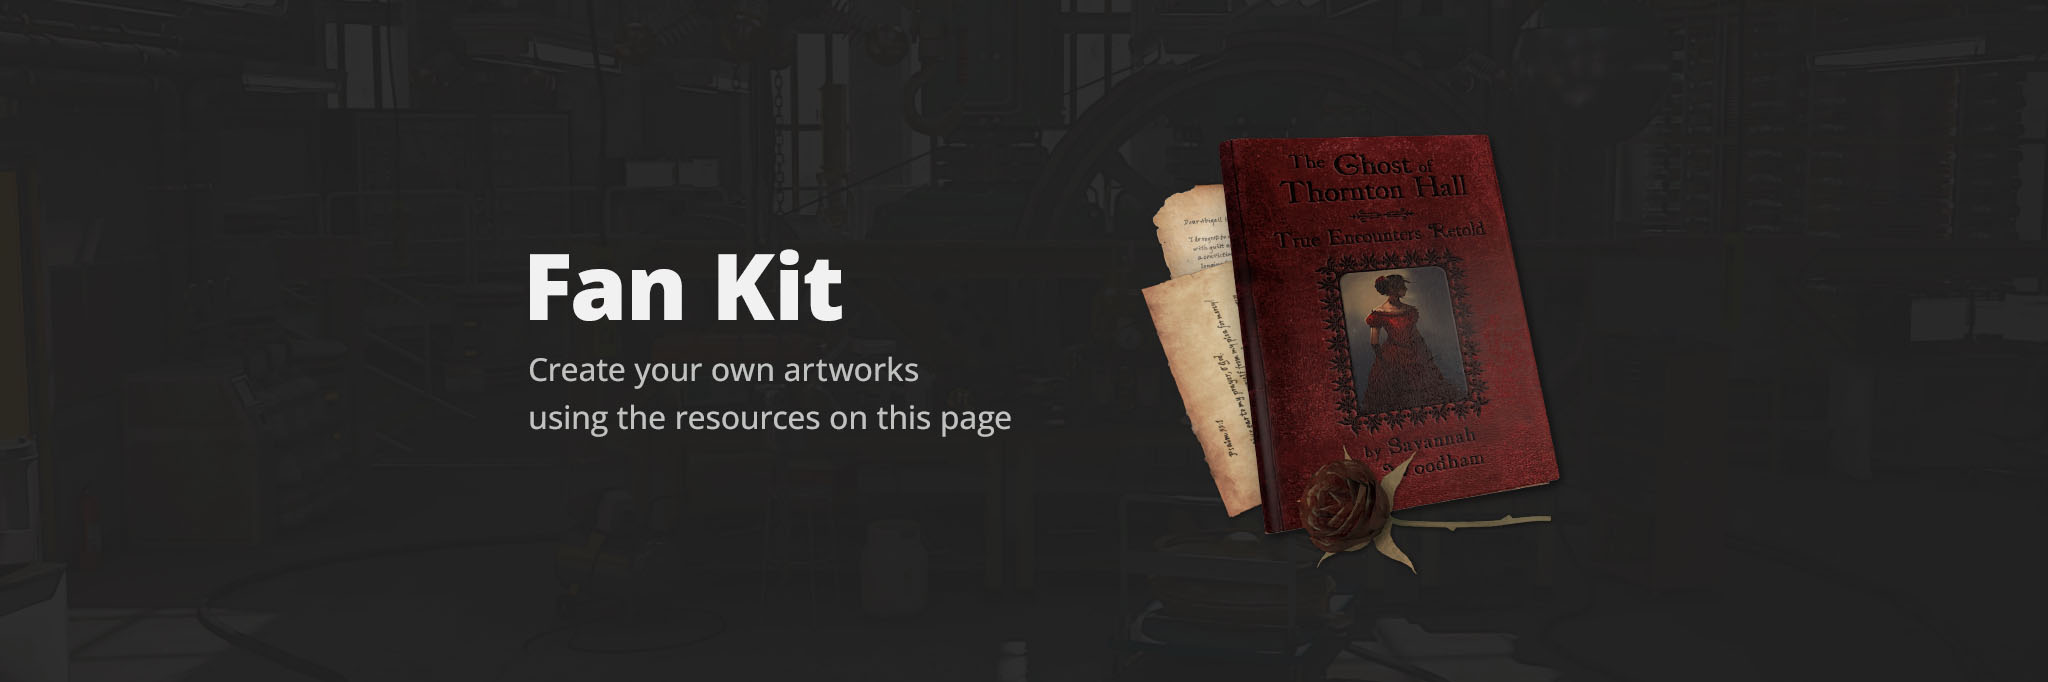 Create your own artworks using the resources on this page